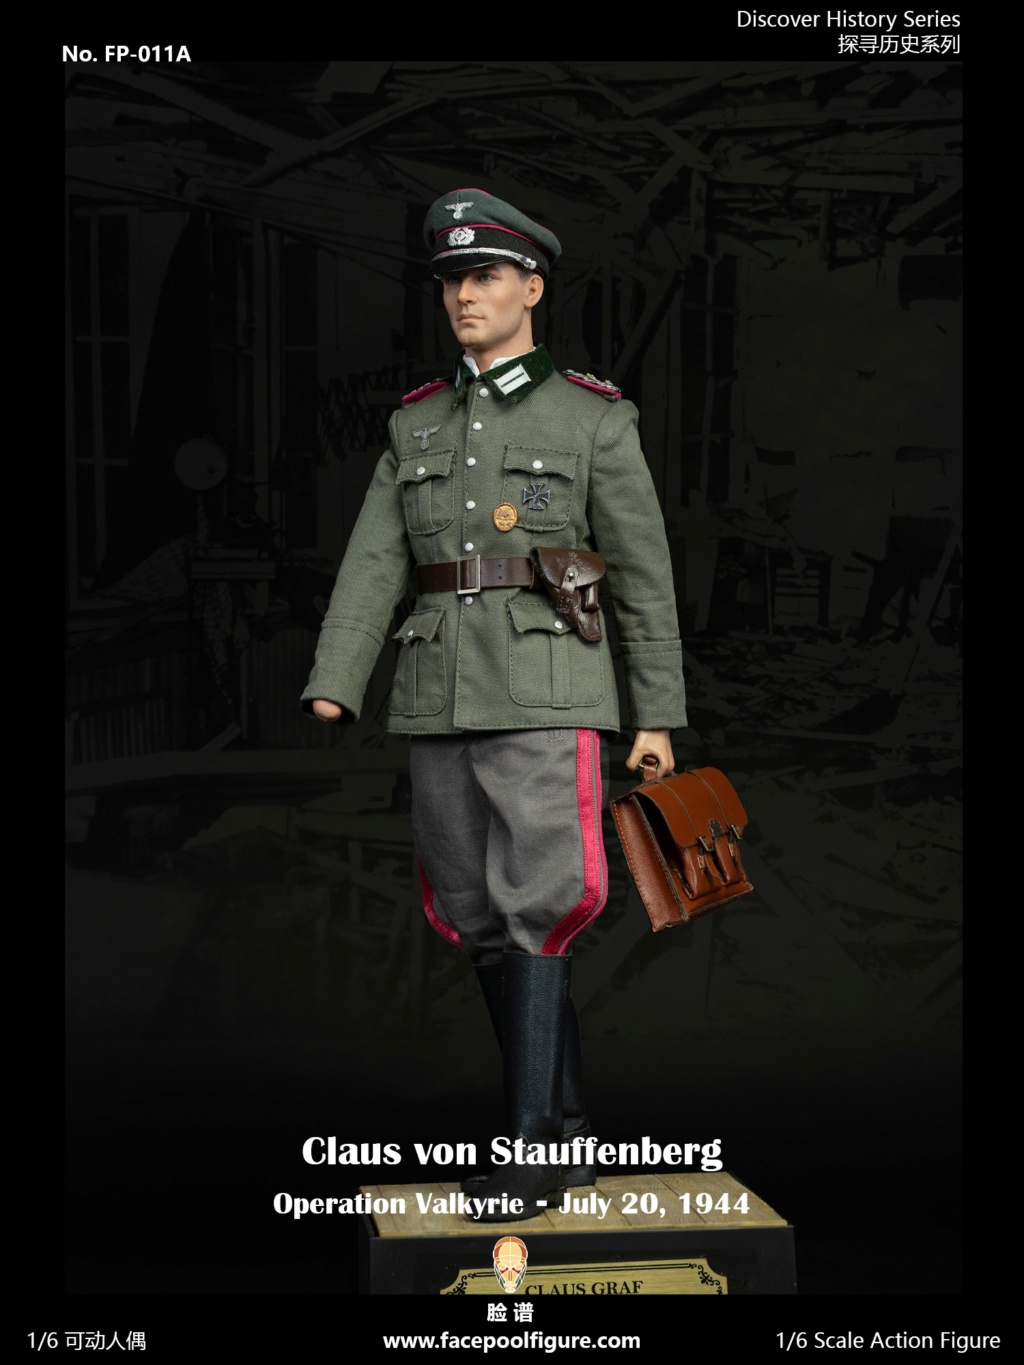 german - NEW PRODUCT: Facepool: 1/6 Exploring history series: Operation Valkyrie (accessories correction) 06465910